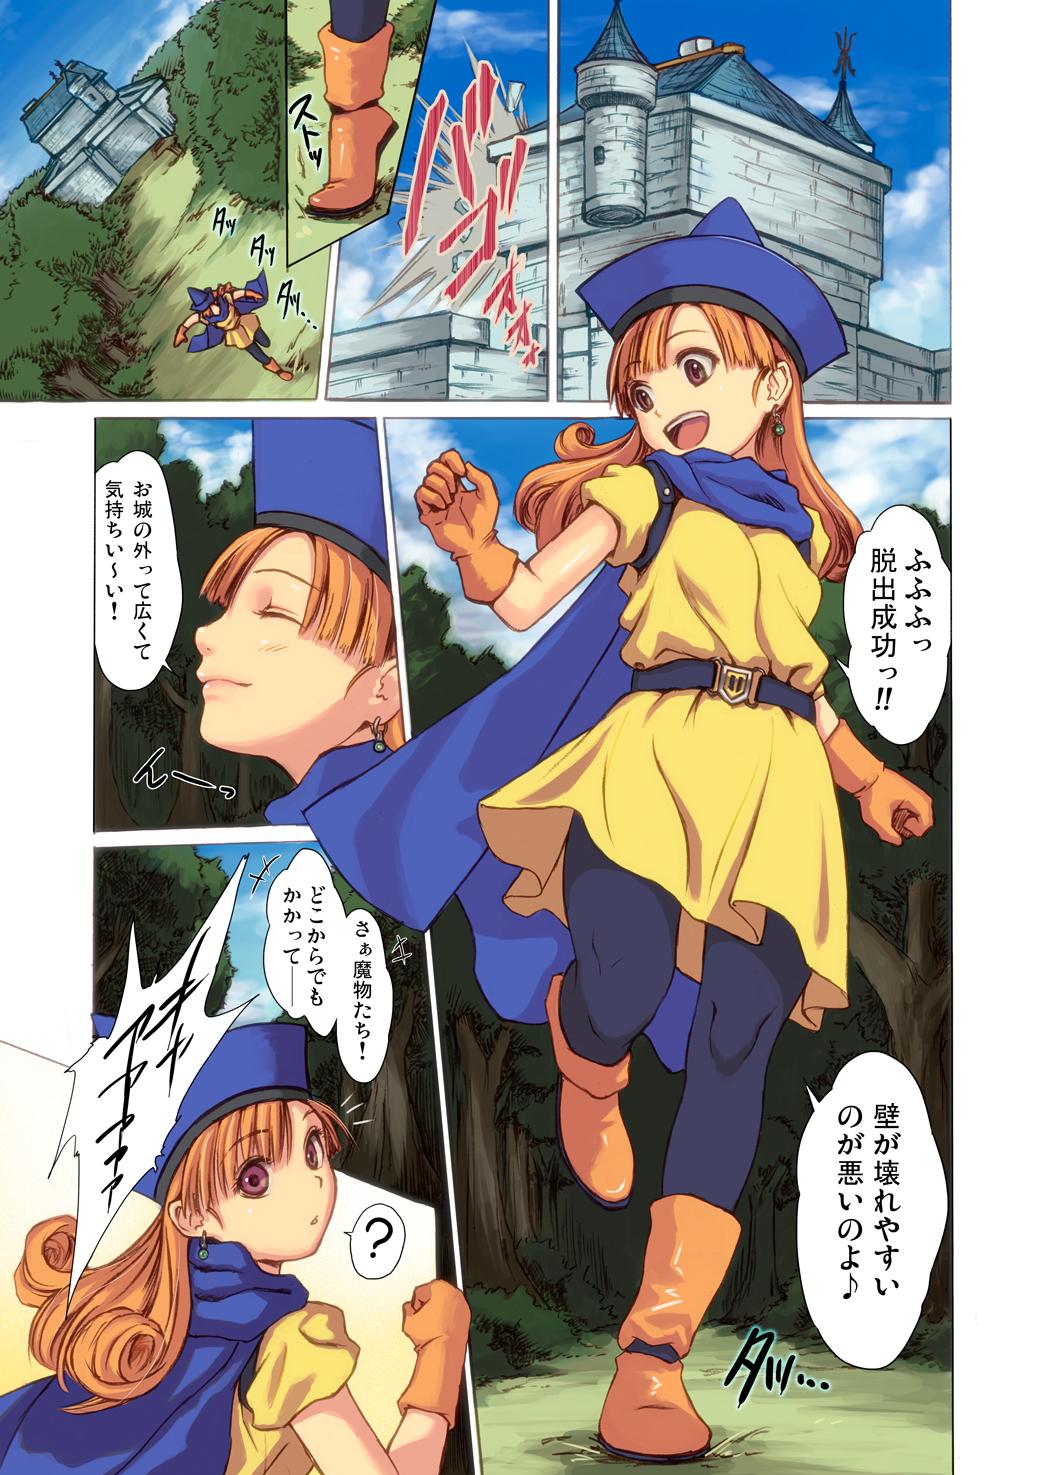 Small Tomboy Princess - Dragon quest iv Outdoors - Page 3